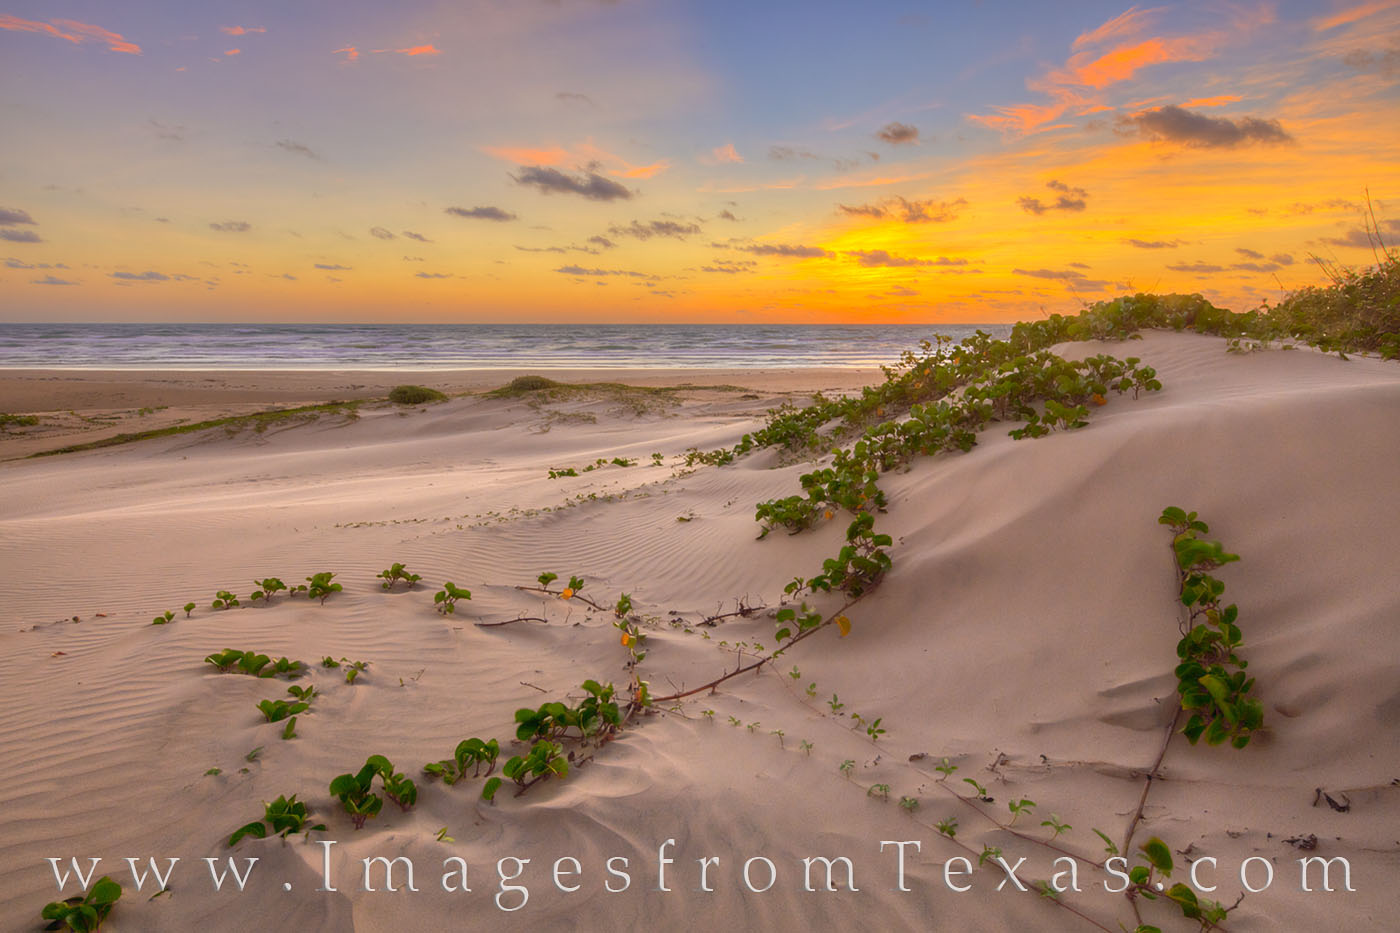 adrianito canlas recommends backpage south padre island pic